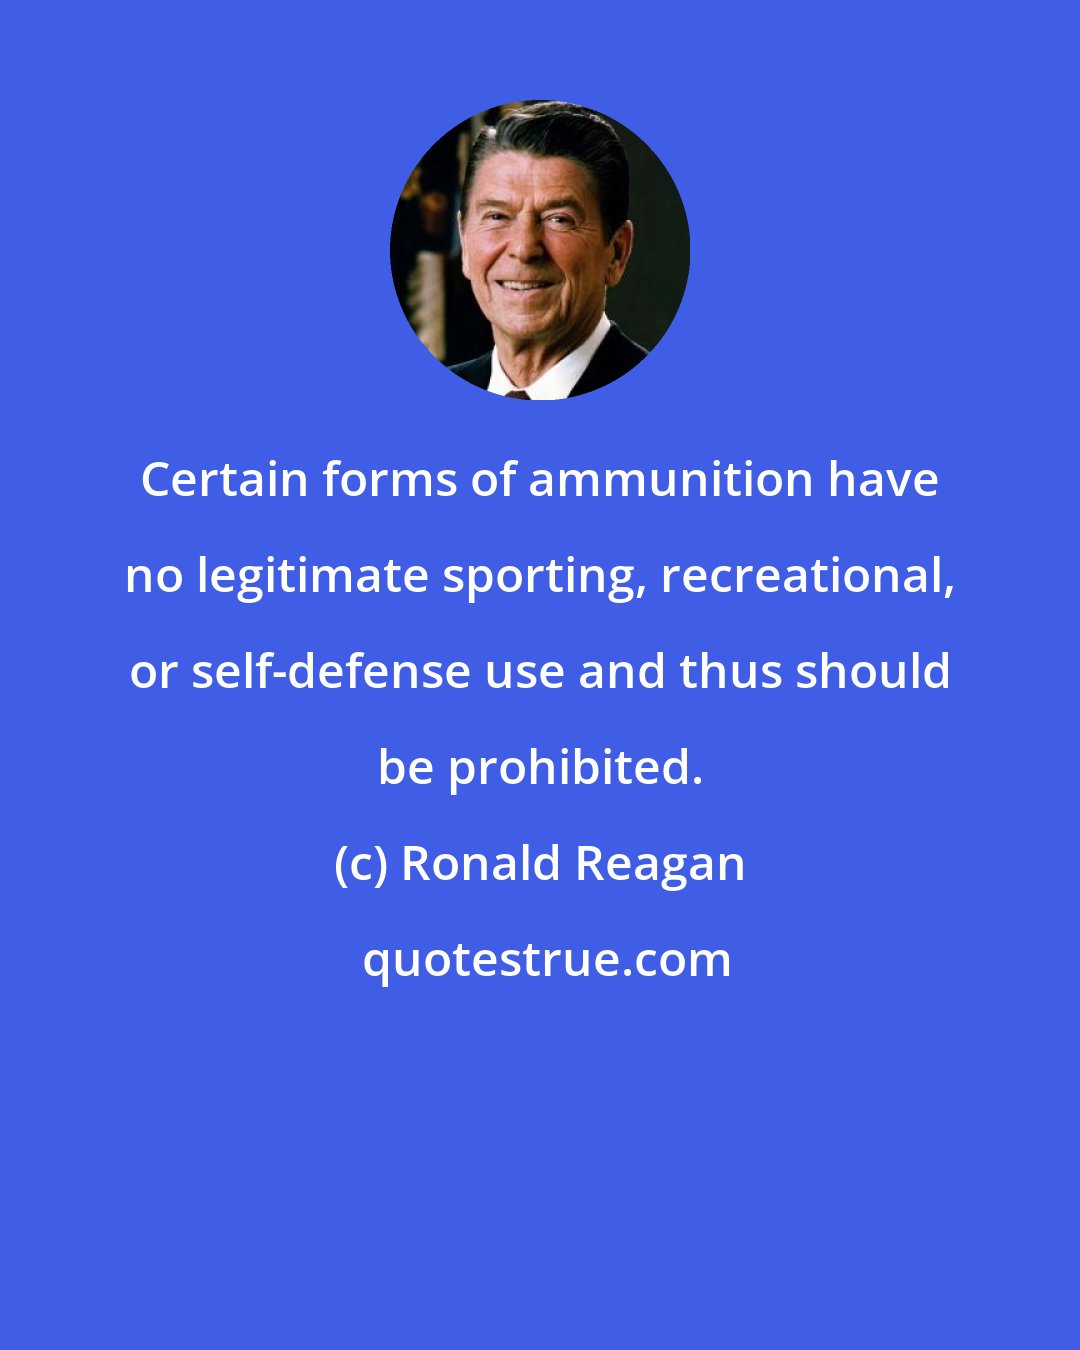 Ronald Reagan: Certain forms of ammunition have no legitimate sporting, recreational, or self-defense use and thus should be prohibited.